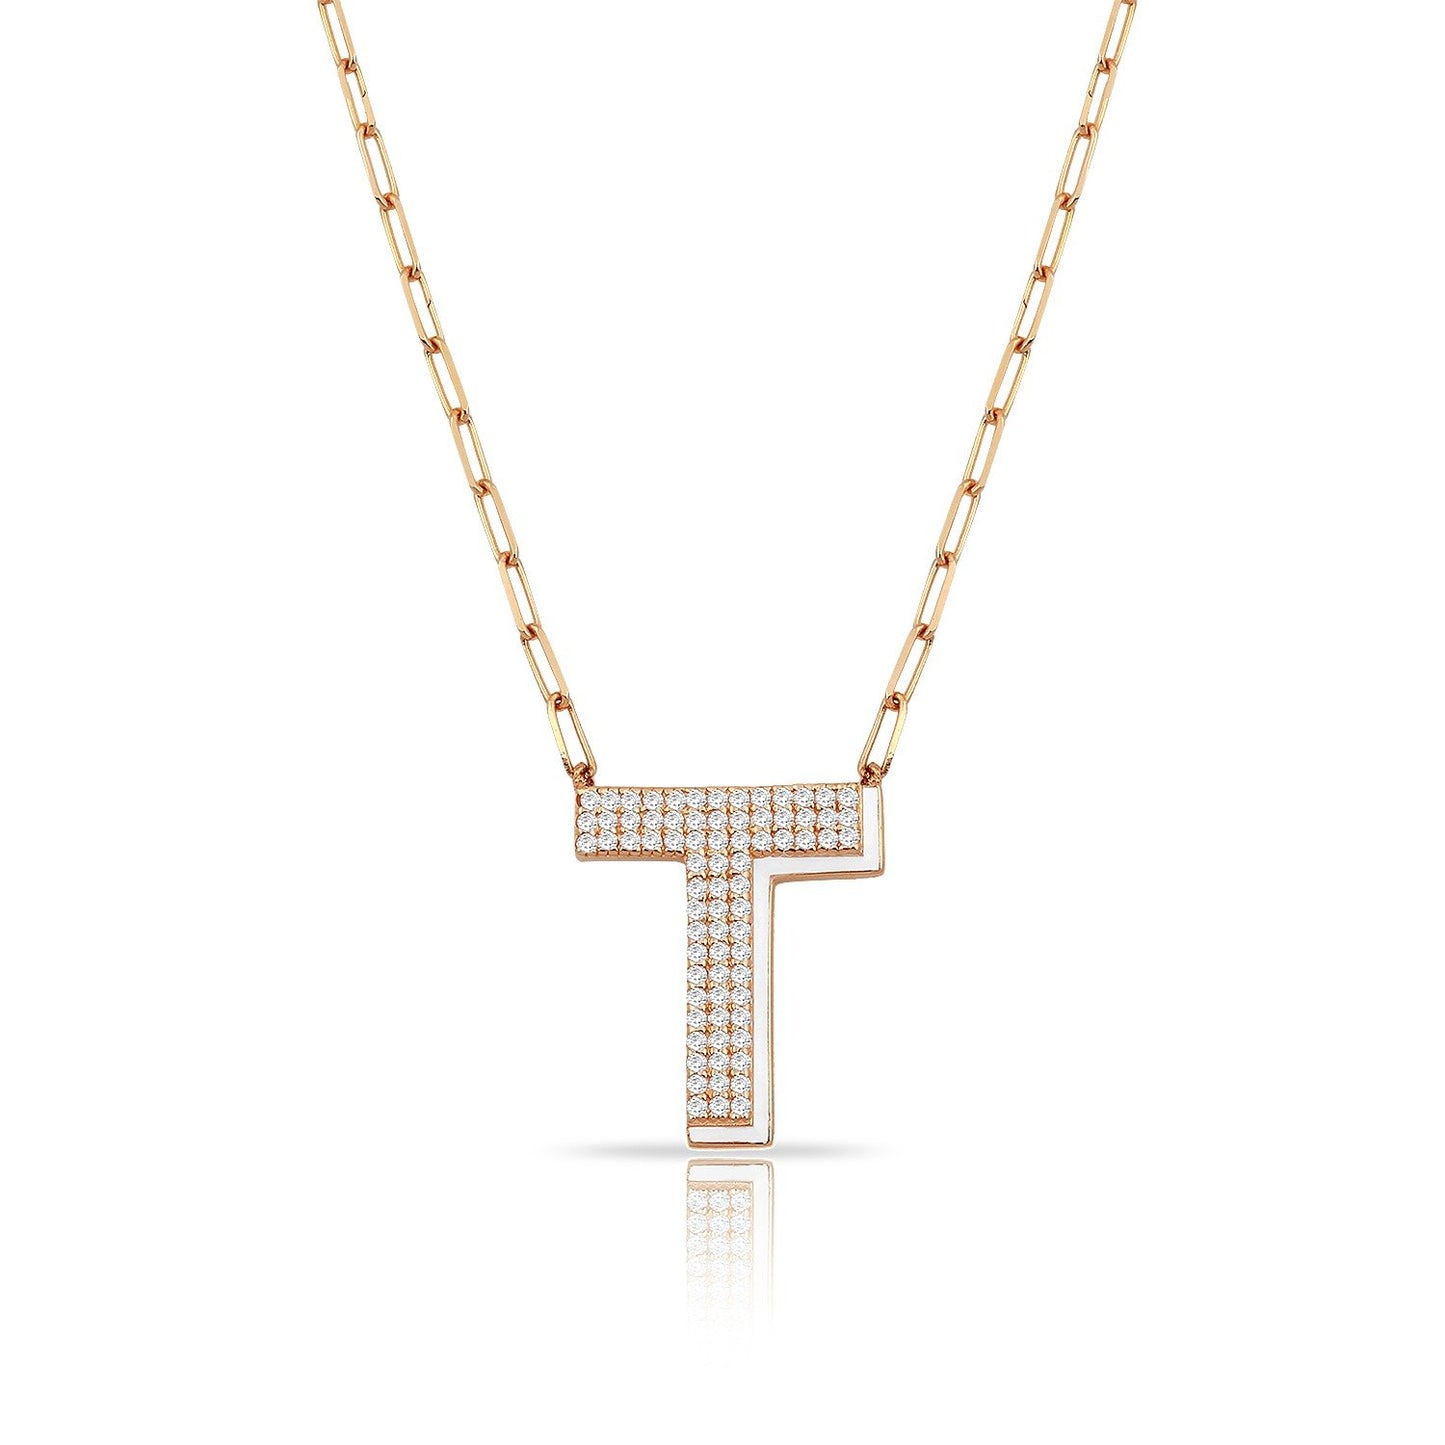 TSK Park Avenue Diamond Initial Necklace JEWELRY The Sis Kiss 14k Rose Gold Empire White